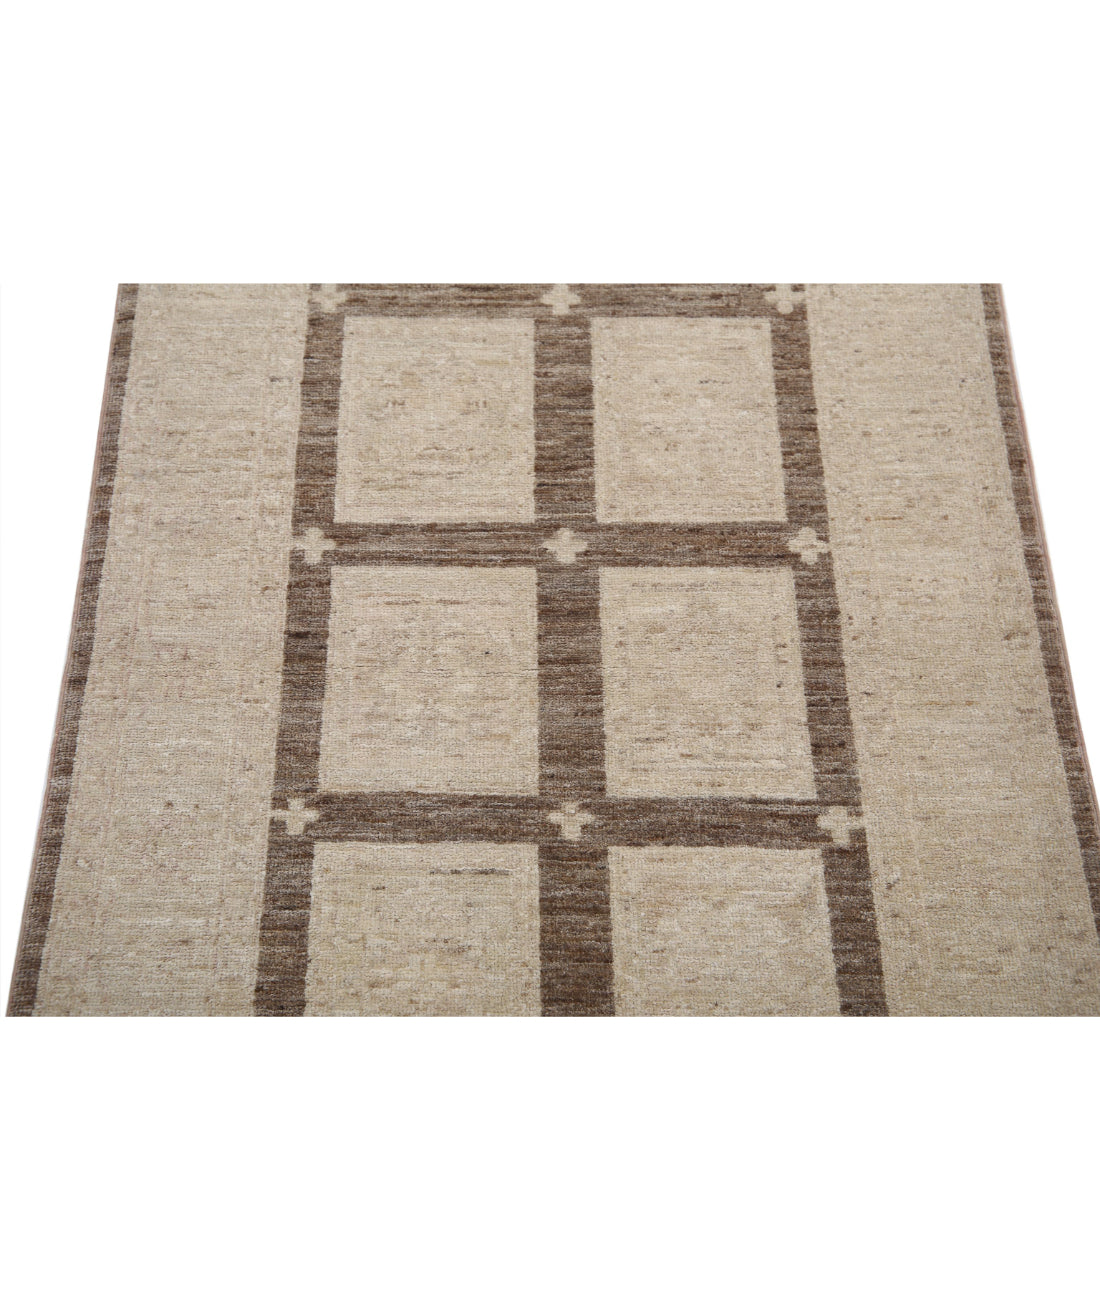 Hand Knotted Serenity Wool Rug - 2'6'' x 3'10'' 2'6'' x 3'10'' (75 X 115) / Brown / Ivory